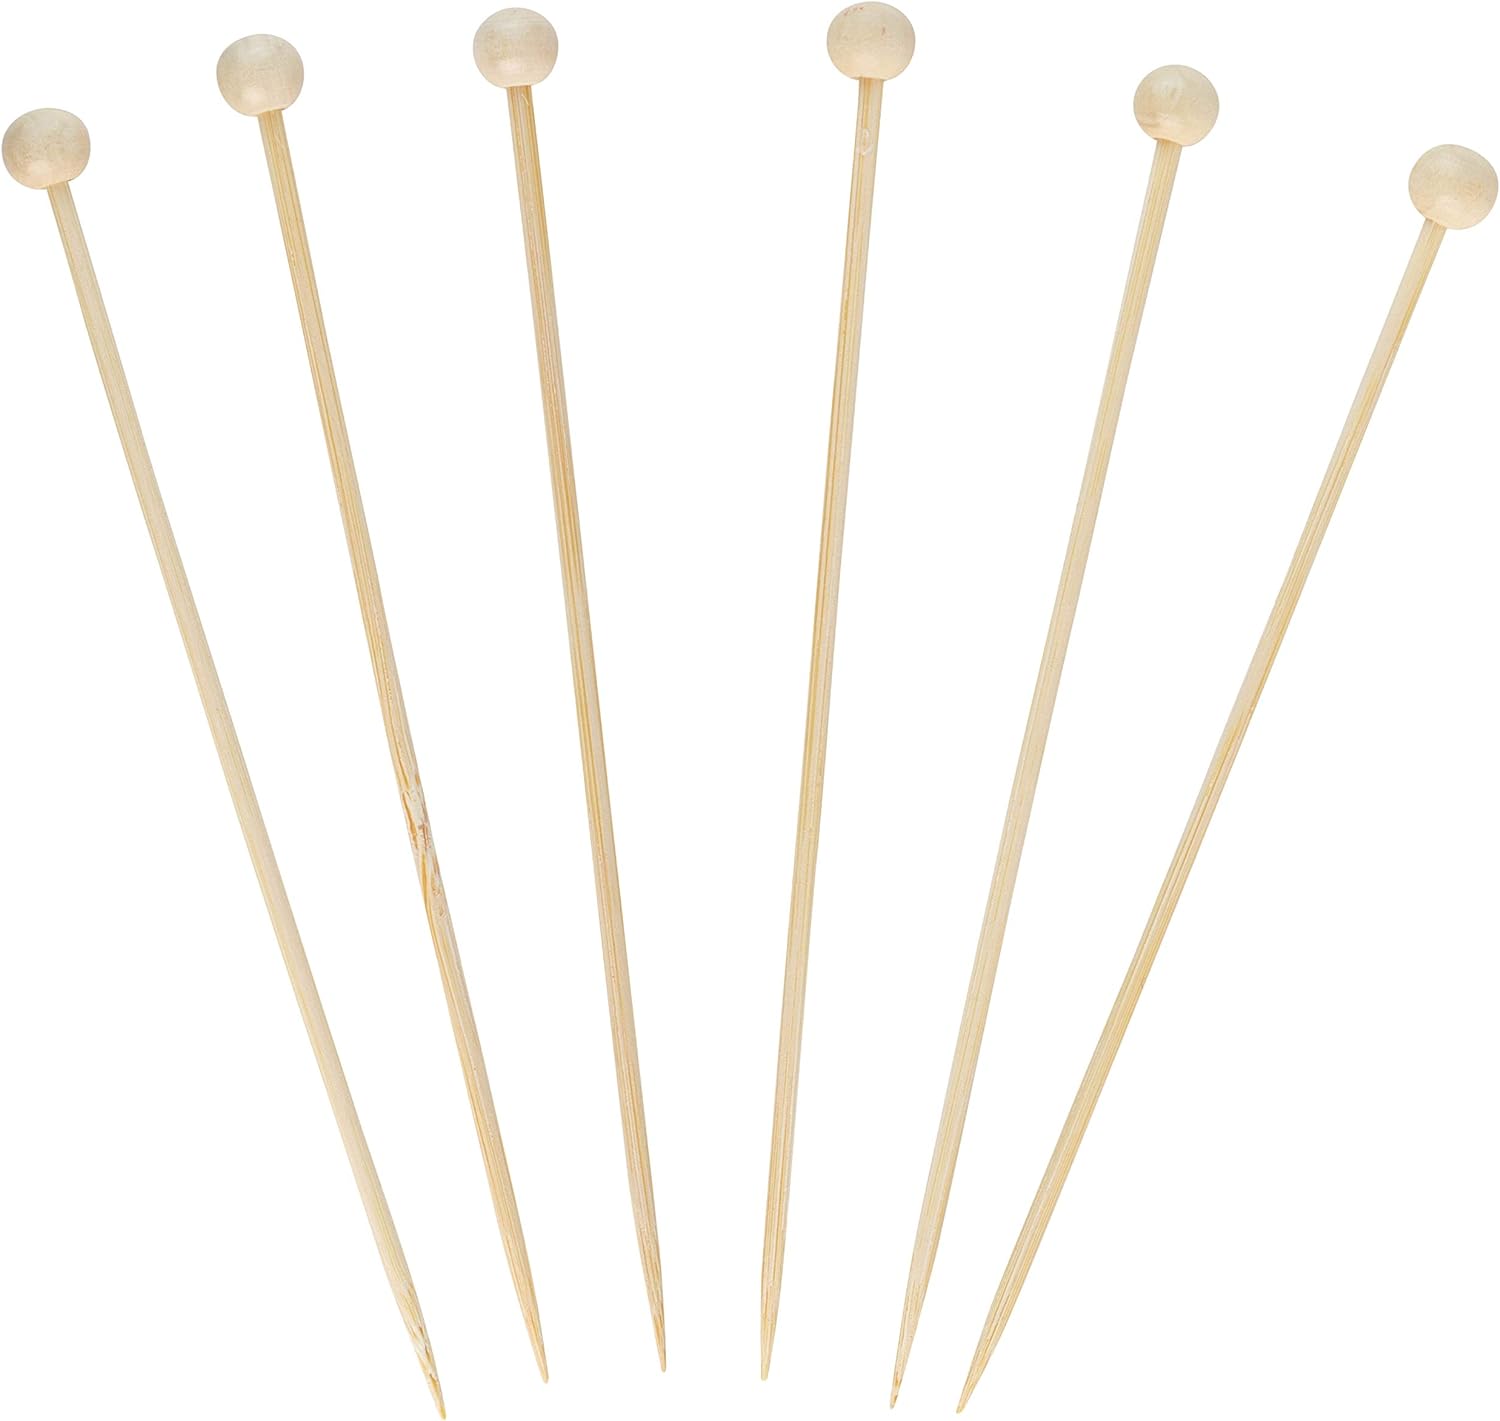 Plasticpro Cocktail Picks Bamboo Toothpicks with Ball End for Cocktails, Appetizers, Fruits, Dessert, 6 inches Pack of 200